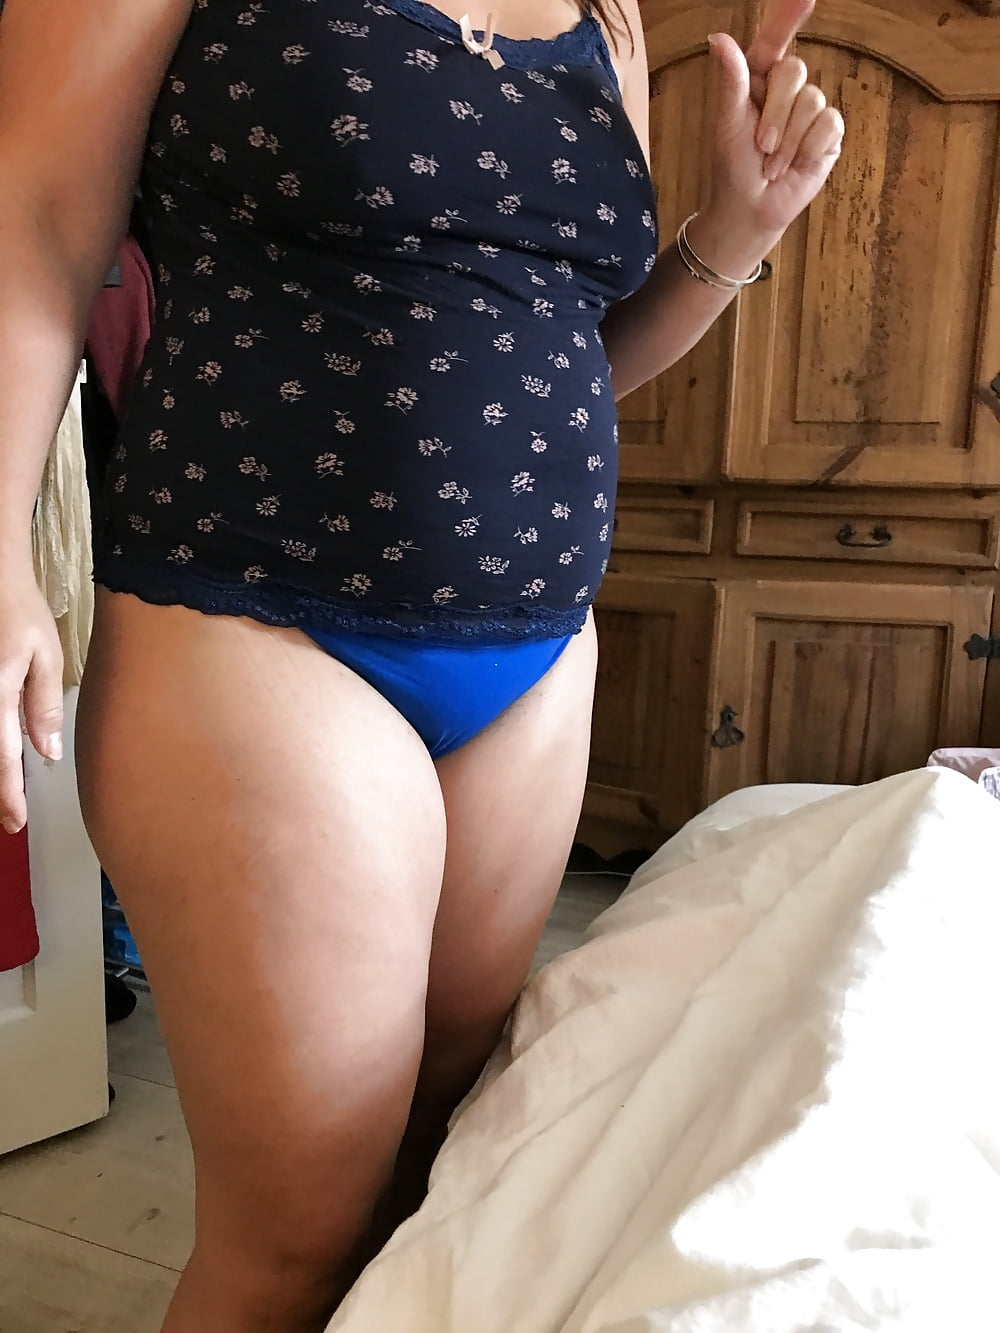 My wife: new blue panties with wedgie (secret photos) .